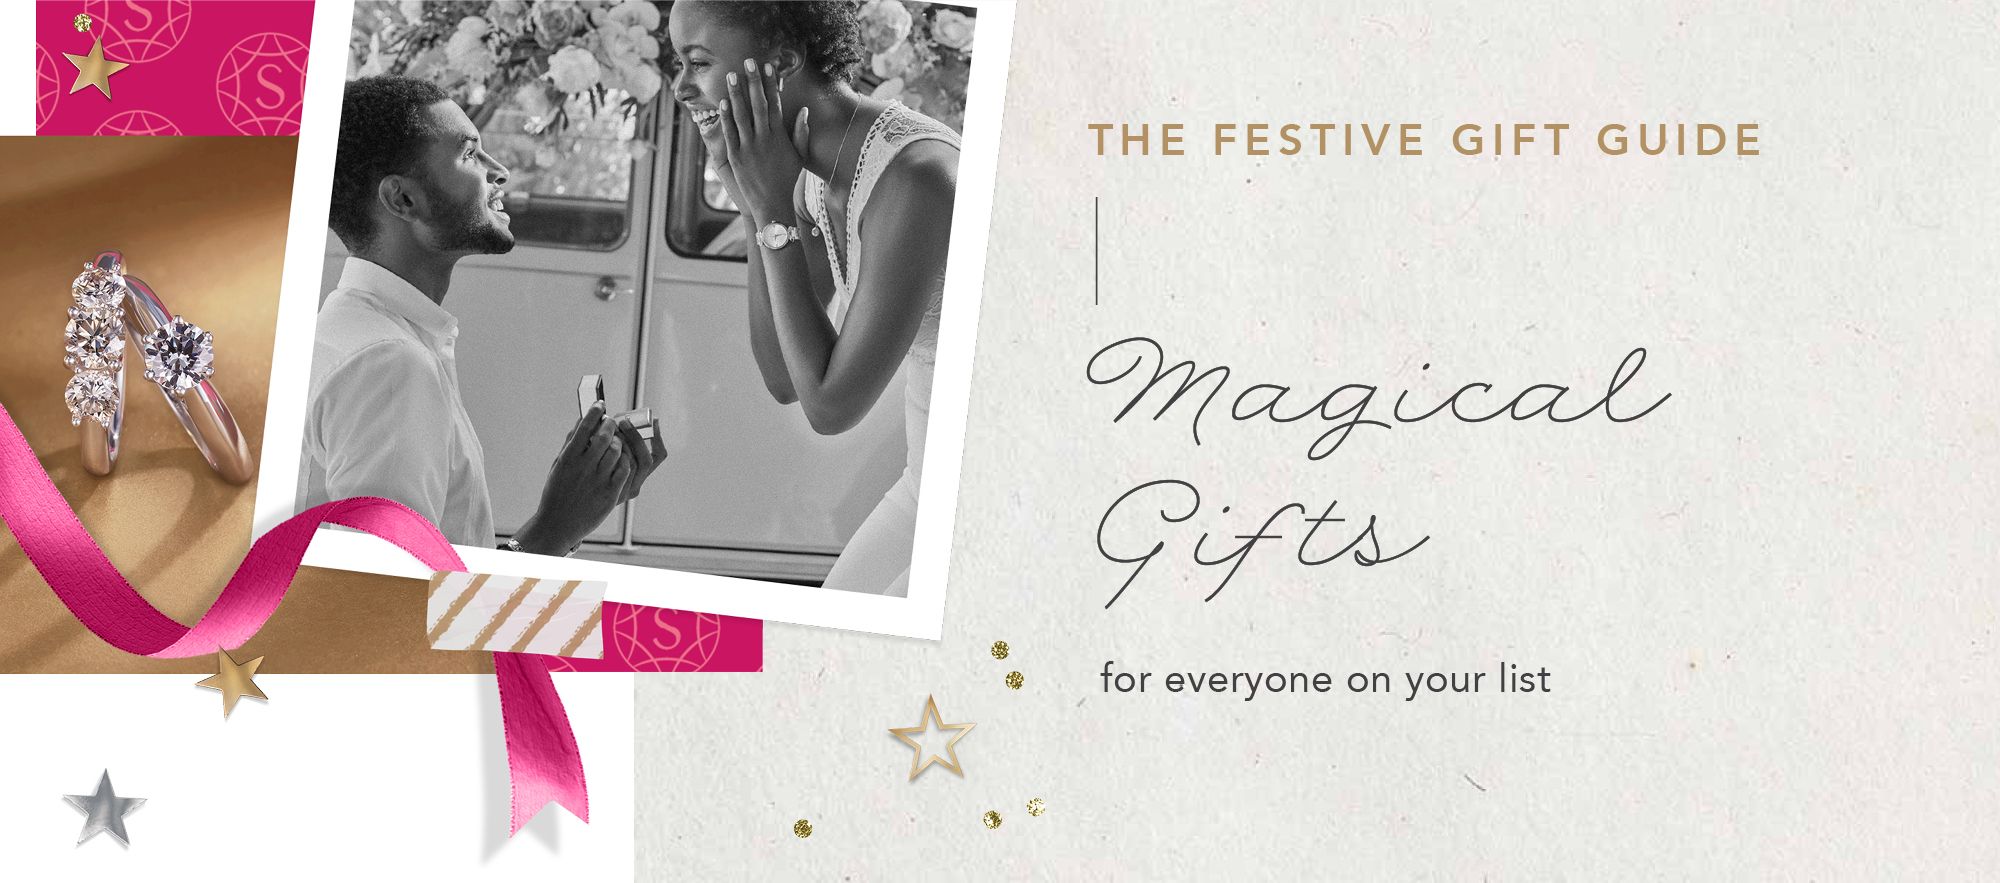 THE FESTIVE GIFT GUIDE Magical Gifts